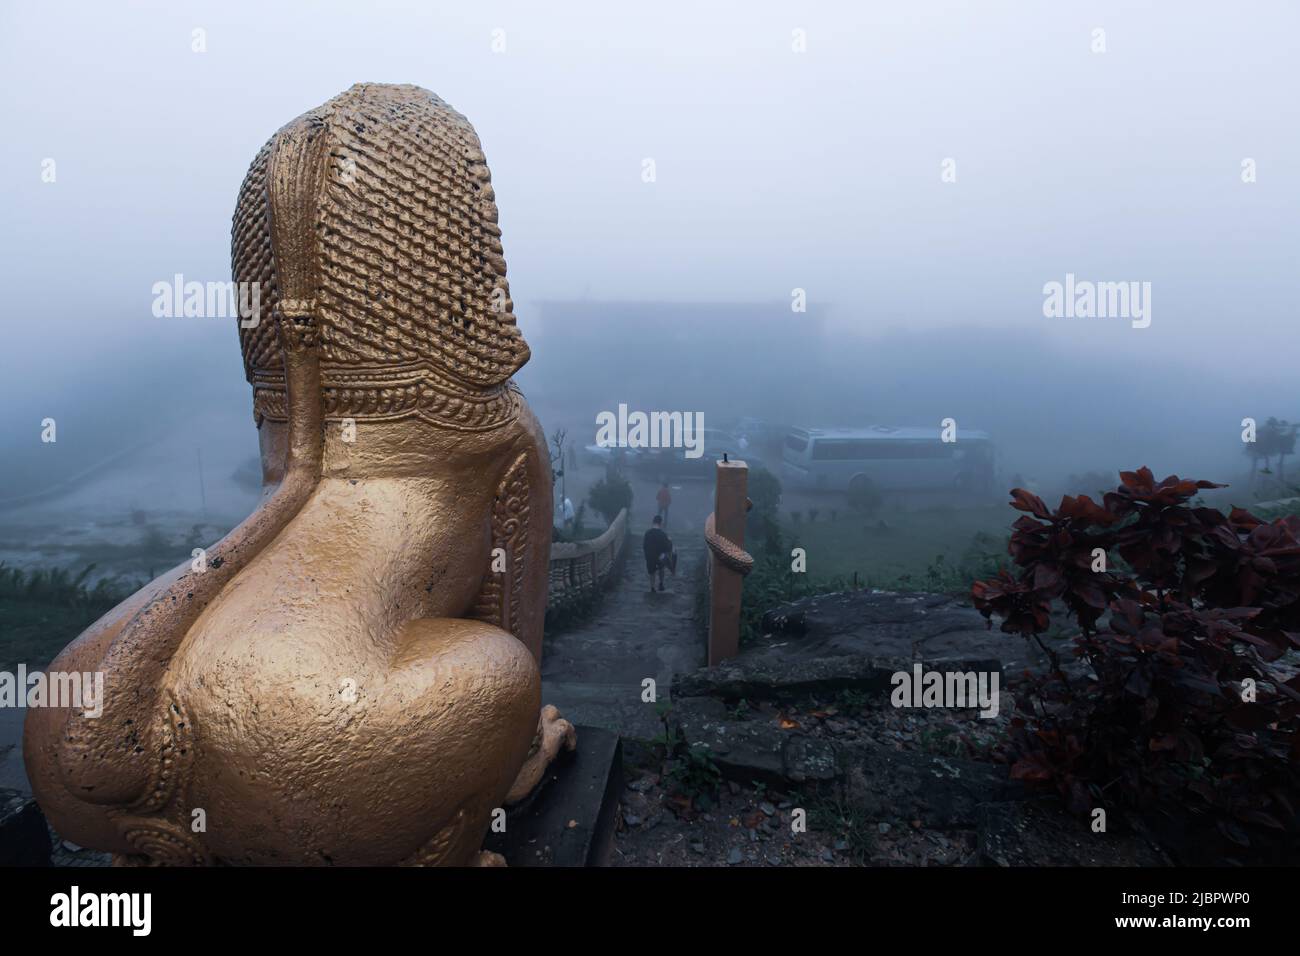 The giant statue of Singha Khmer in fog at Wat Sampov Pram, the Buddhist temple was built in 1924. Damrei Mountains, Kampot, Cambodia. Stock Photo